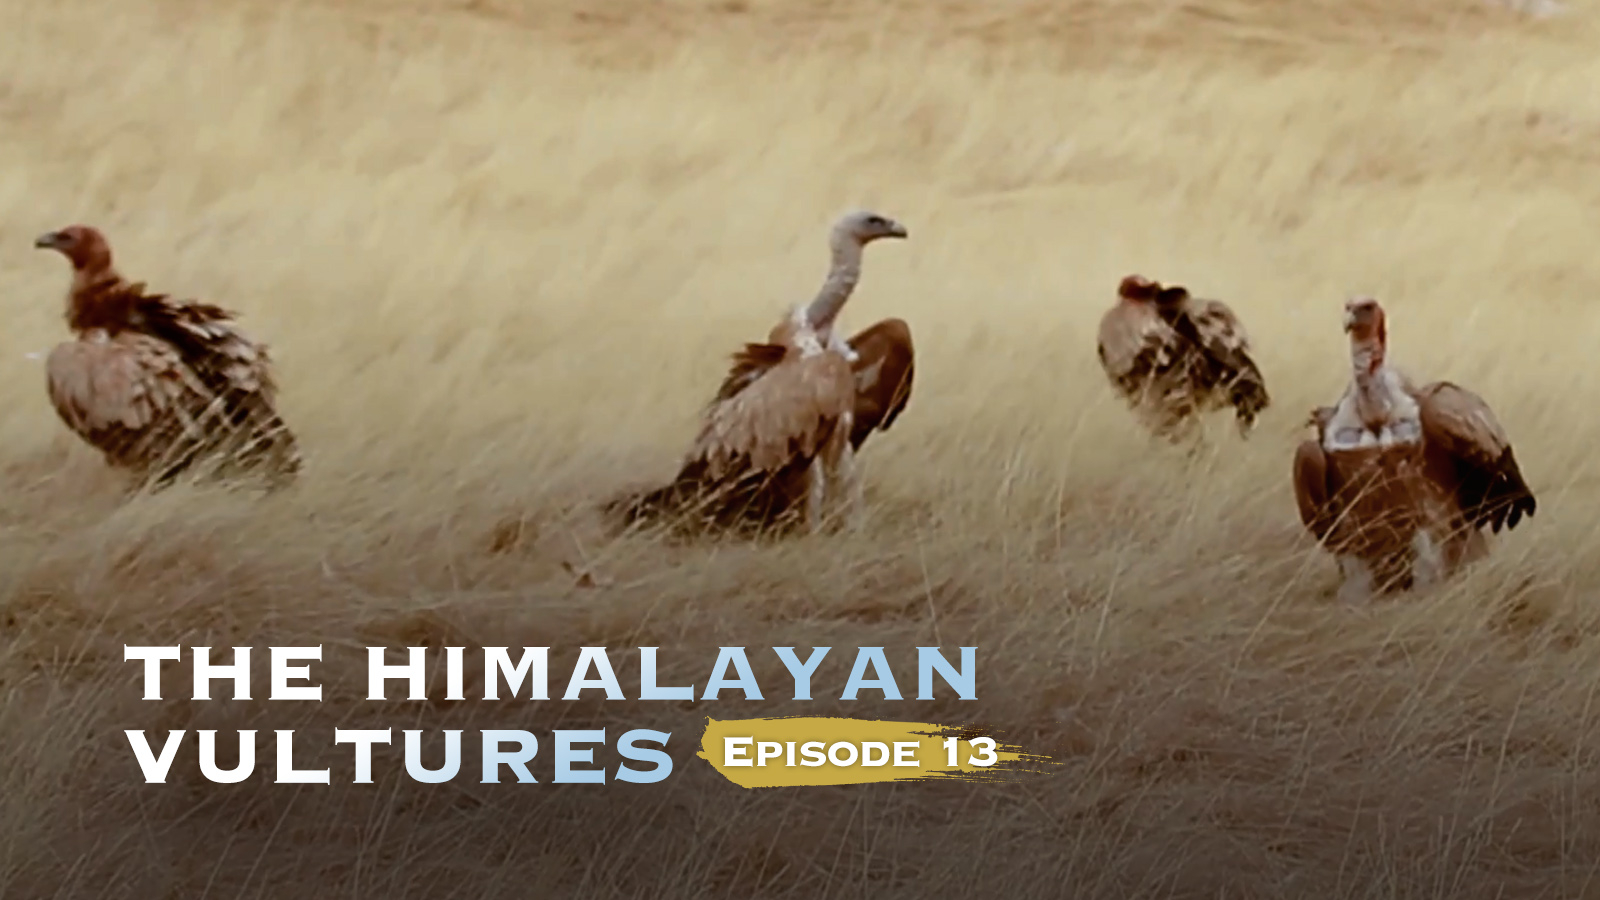 The Himalayan vultures: Fighting for food